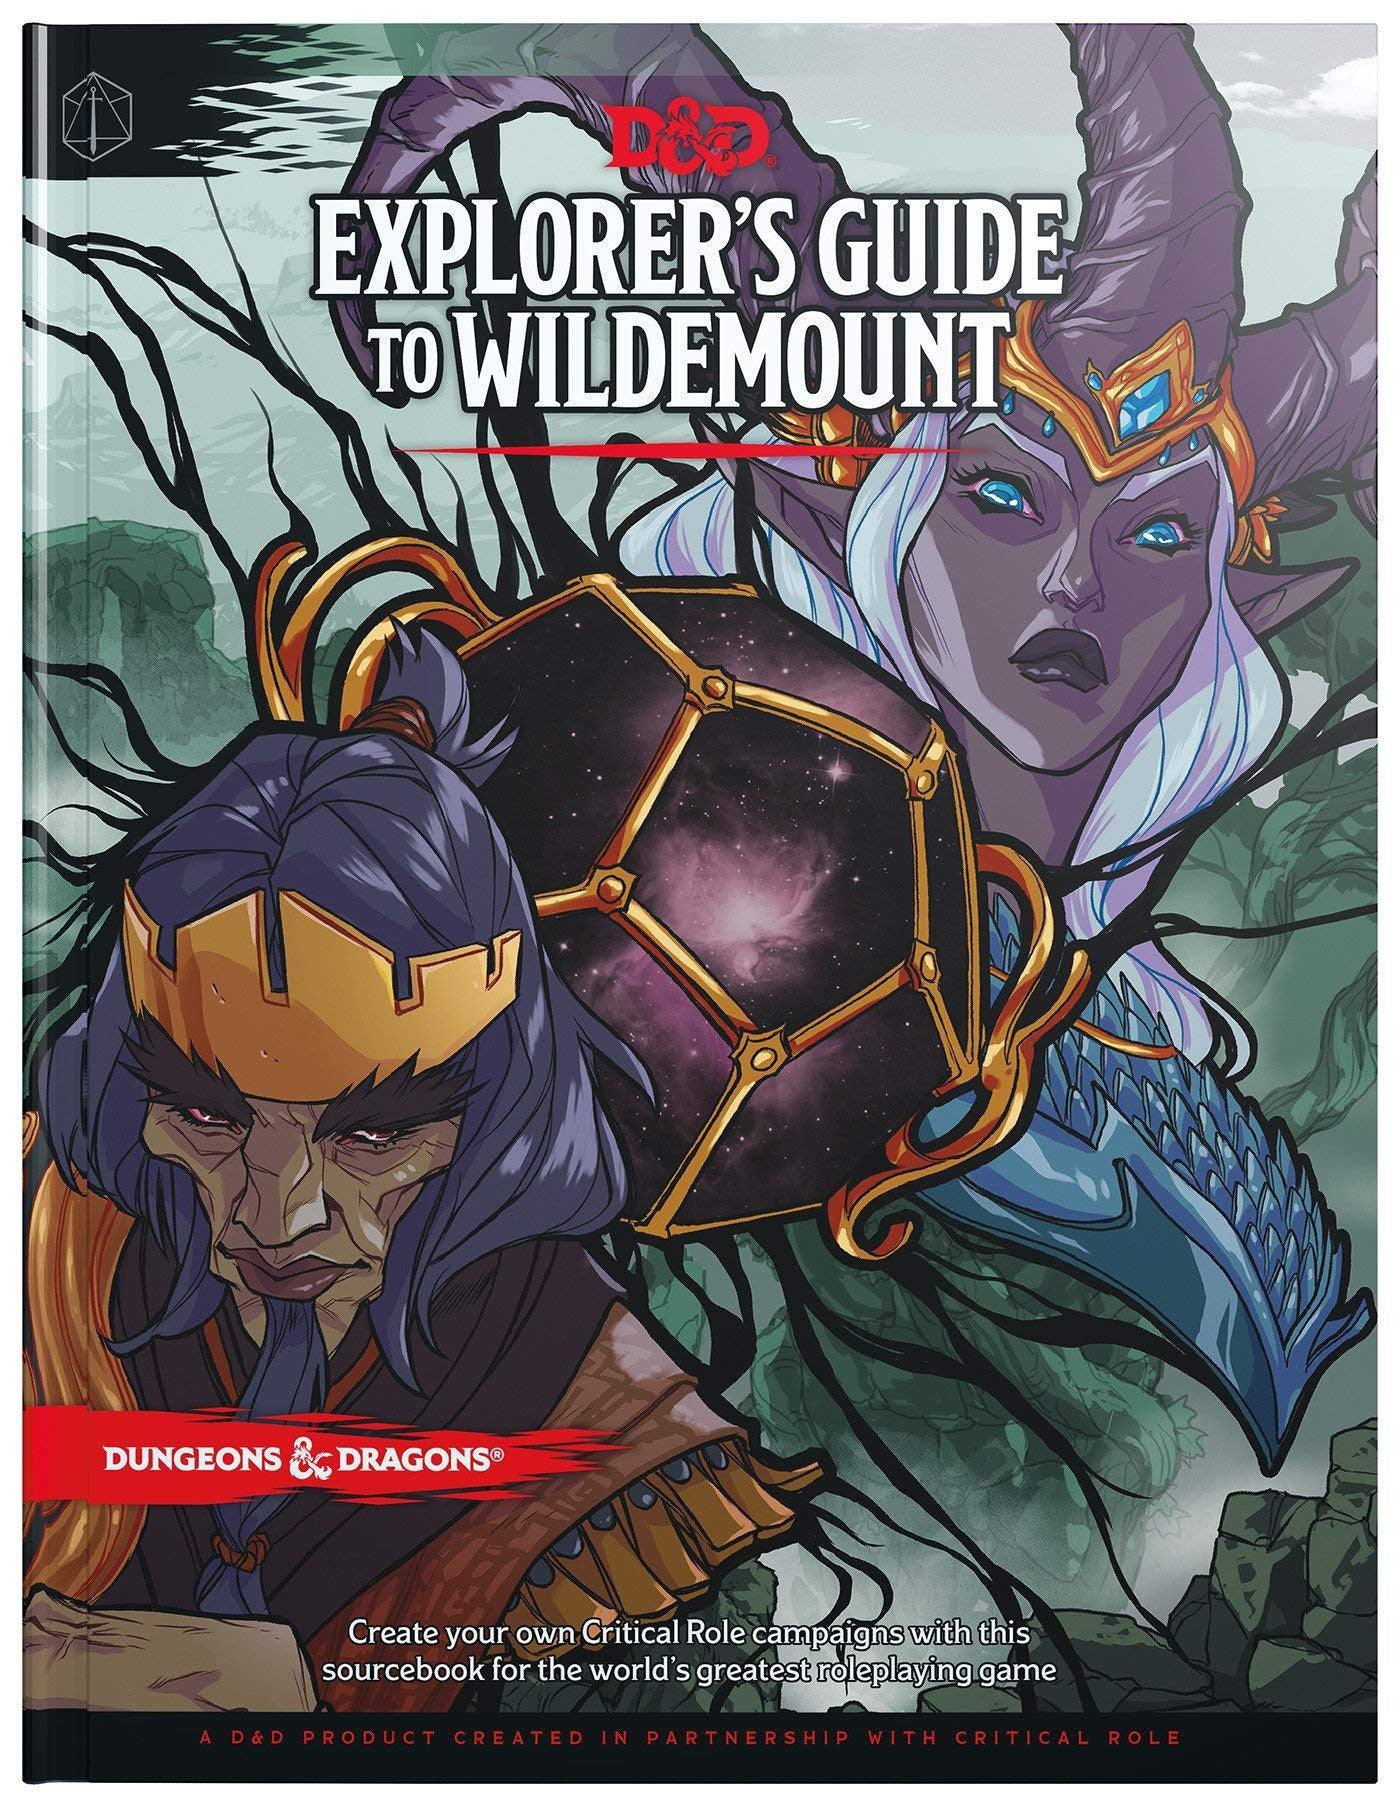 VR-87489 D&D Dungeons & Dragons Explorers Guide to Wildemount Hardcover - Wizards of the Coast - Titan Pop Culture